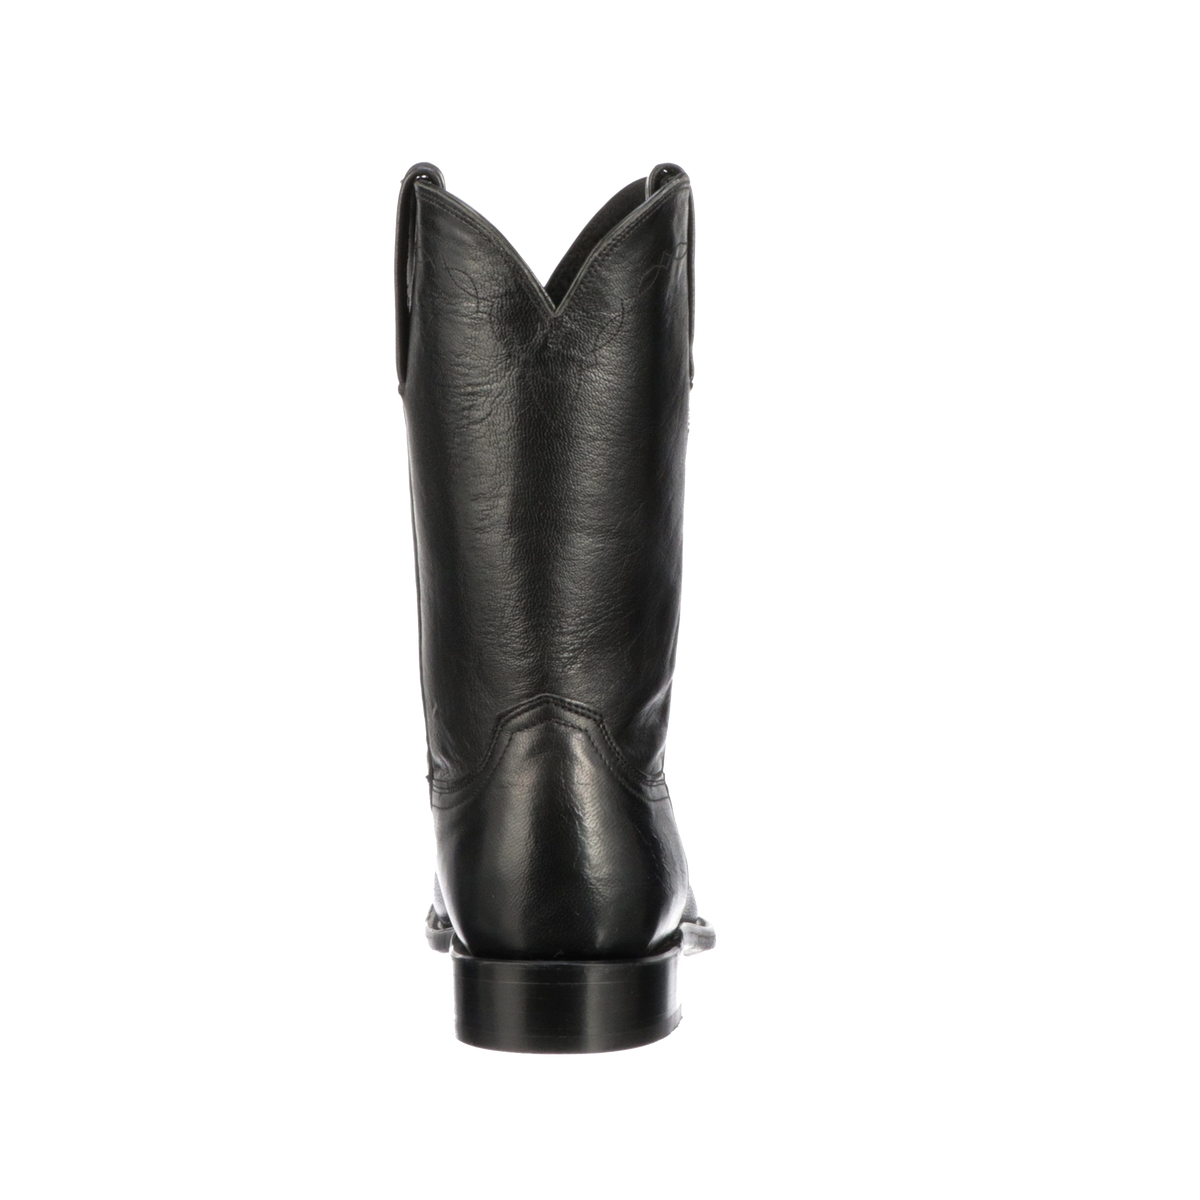 D-Shadow Heeled Boot Black Leather-Effect Stretch Material with